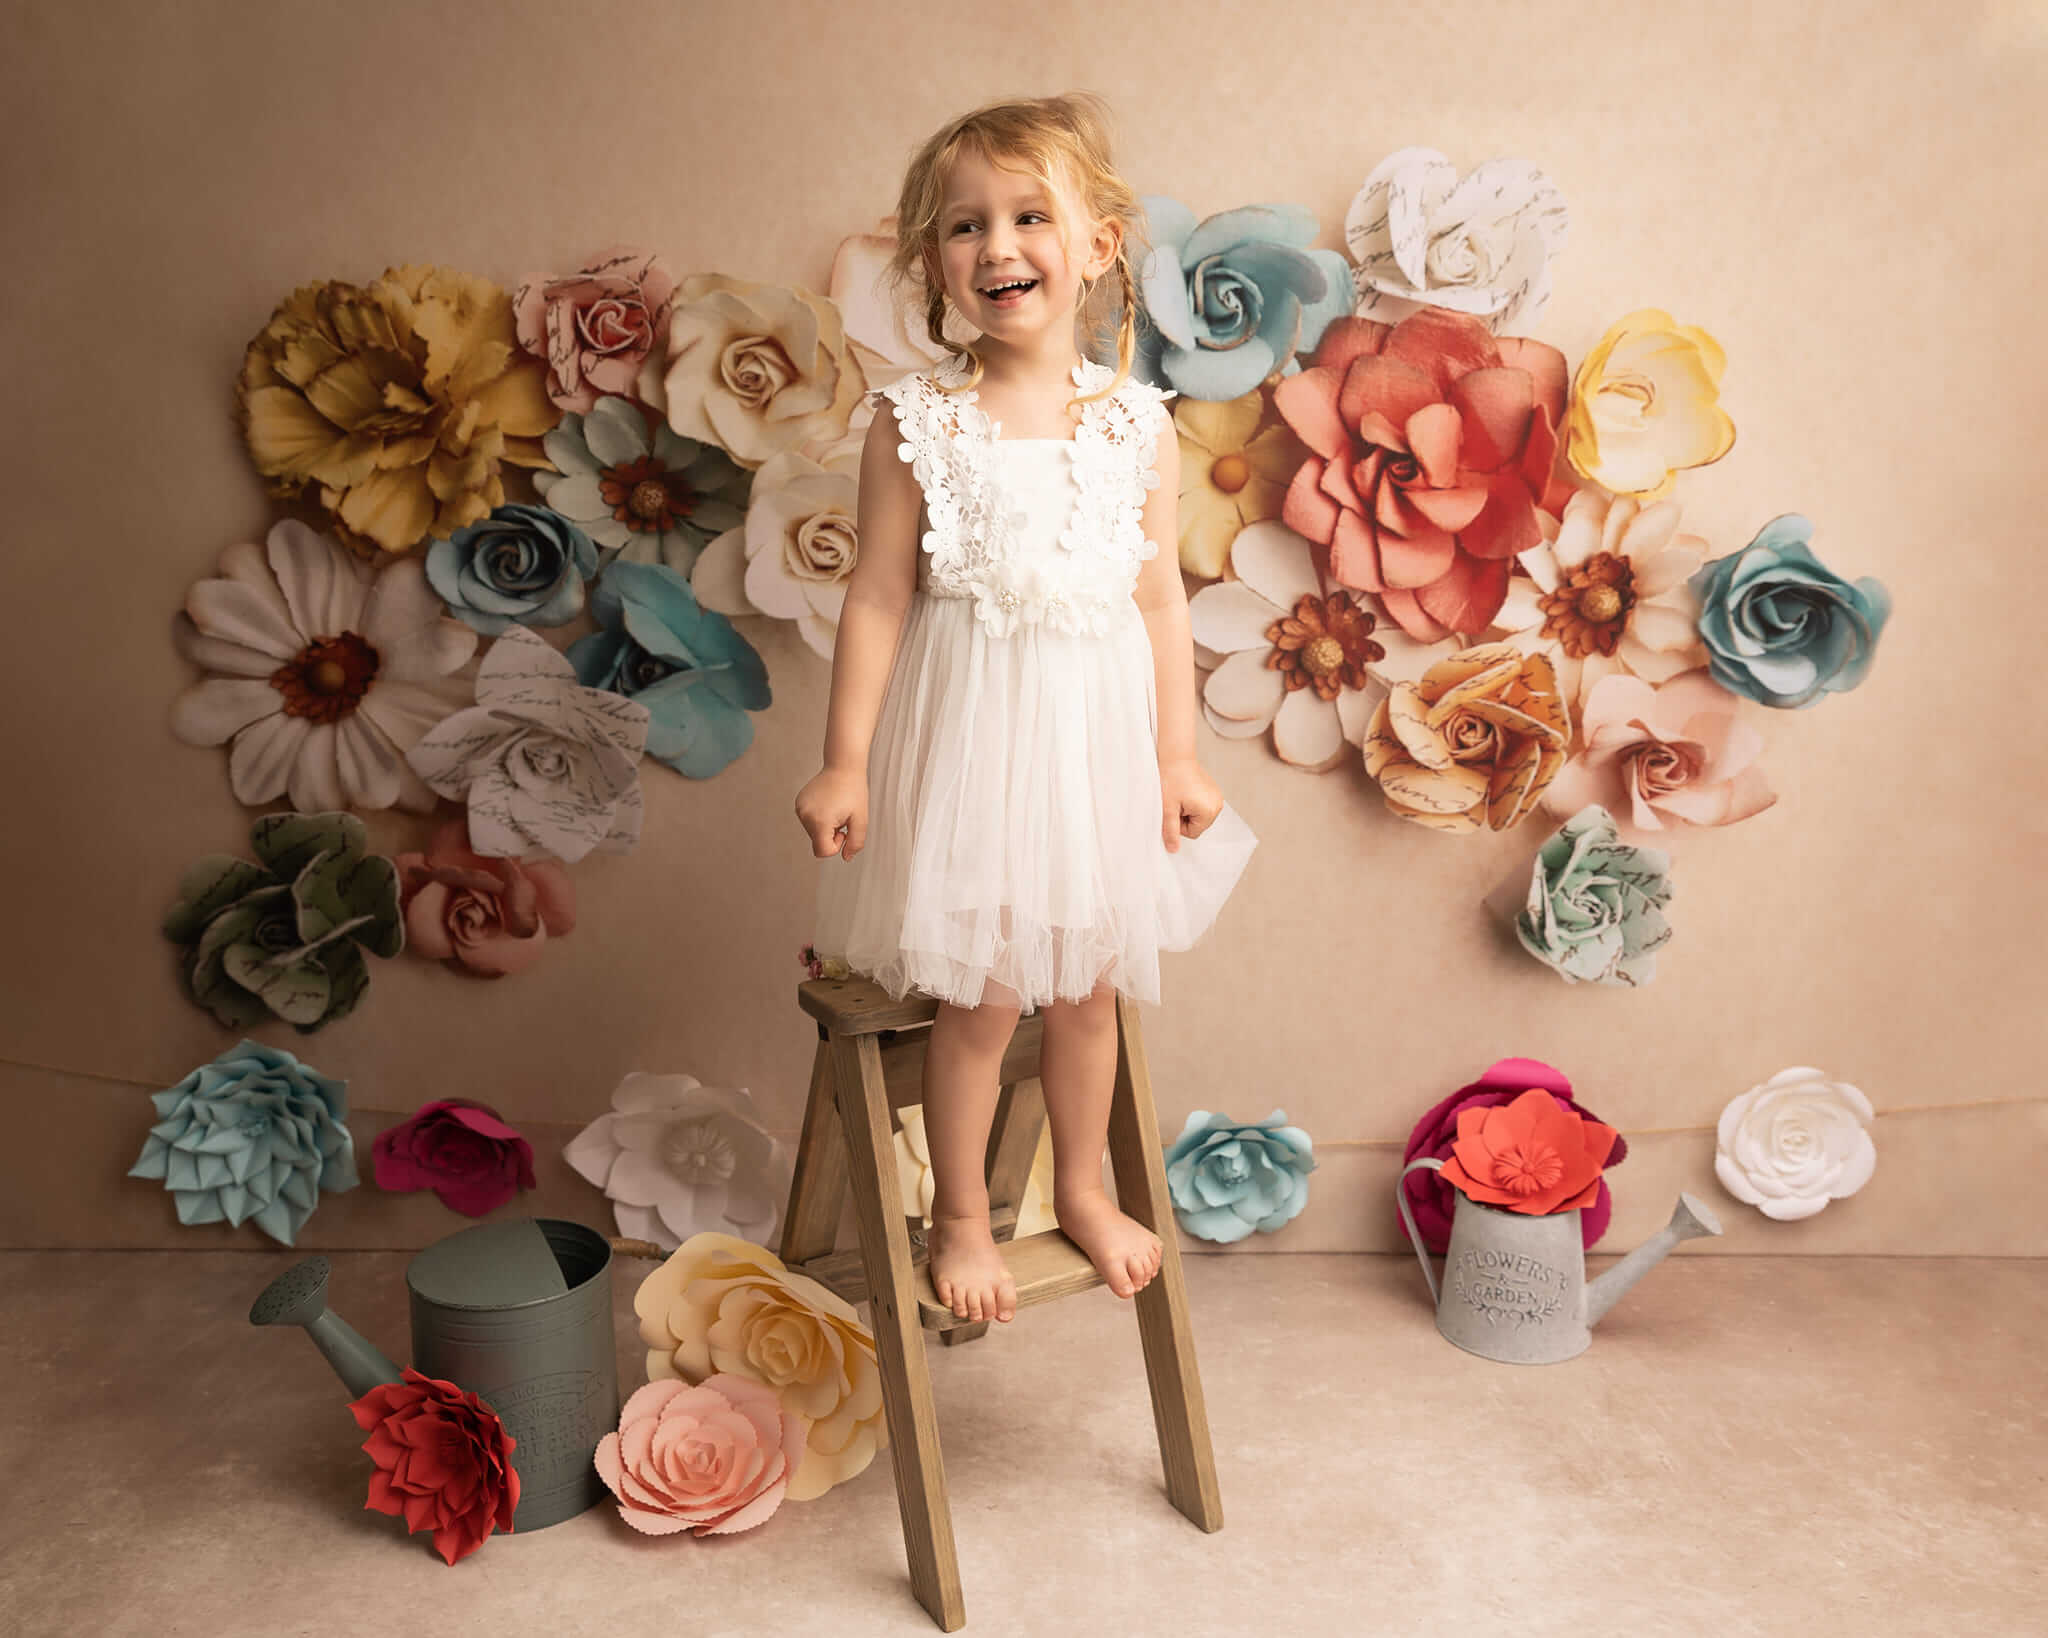 Kate 3D  Wall flowers backdrop for Photography Designed by Melissa King - Kate Backdrop